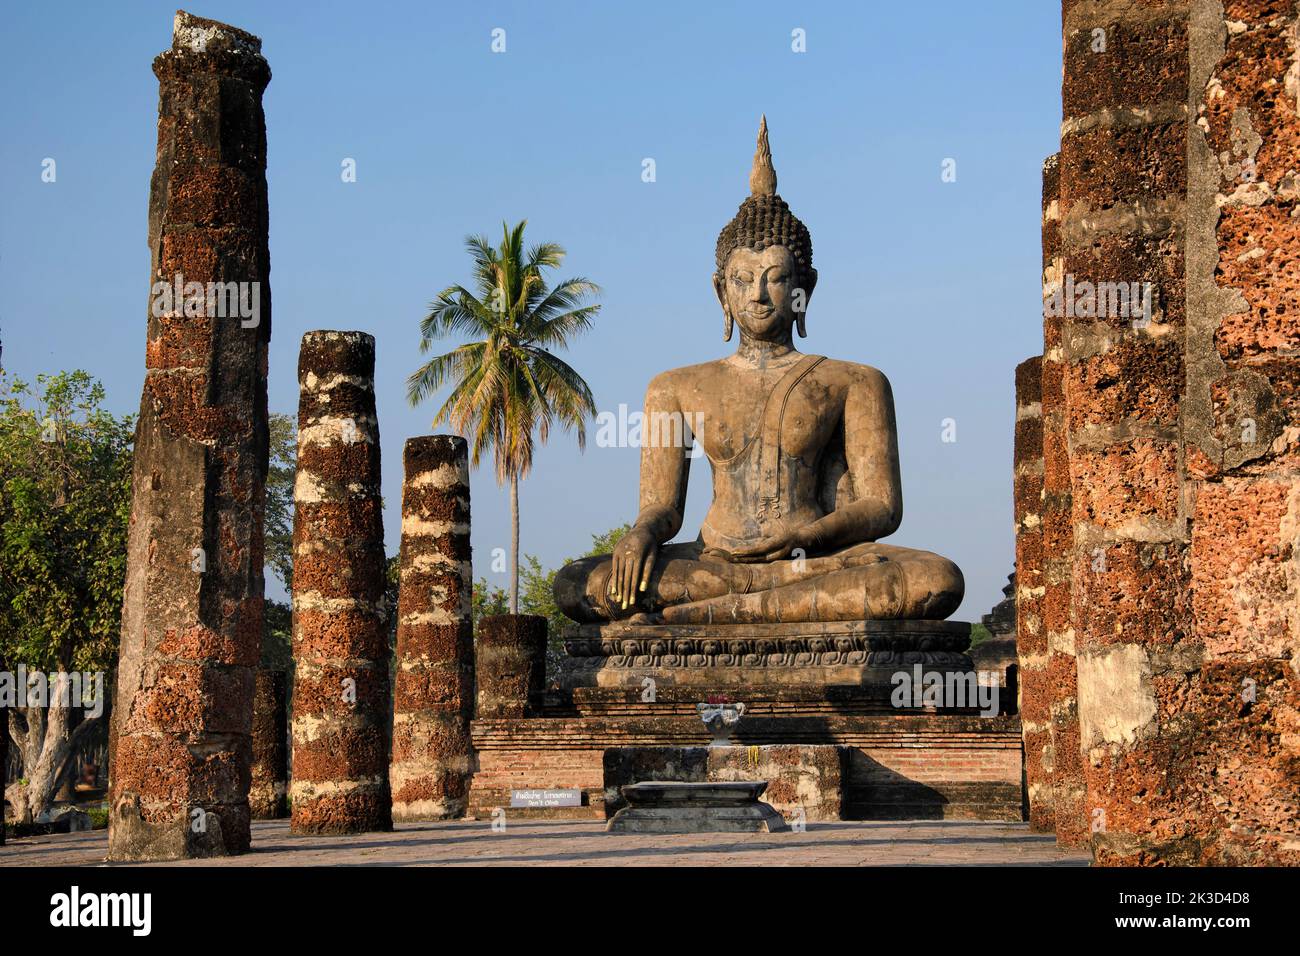 Seated Buddha statue at sunrise in Wat Mahathat temple, Sukhothai Historical Park, UNESCO World Heritage Site, Northern Thailand. Stock Photo